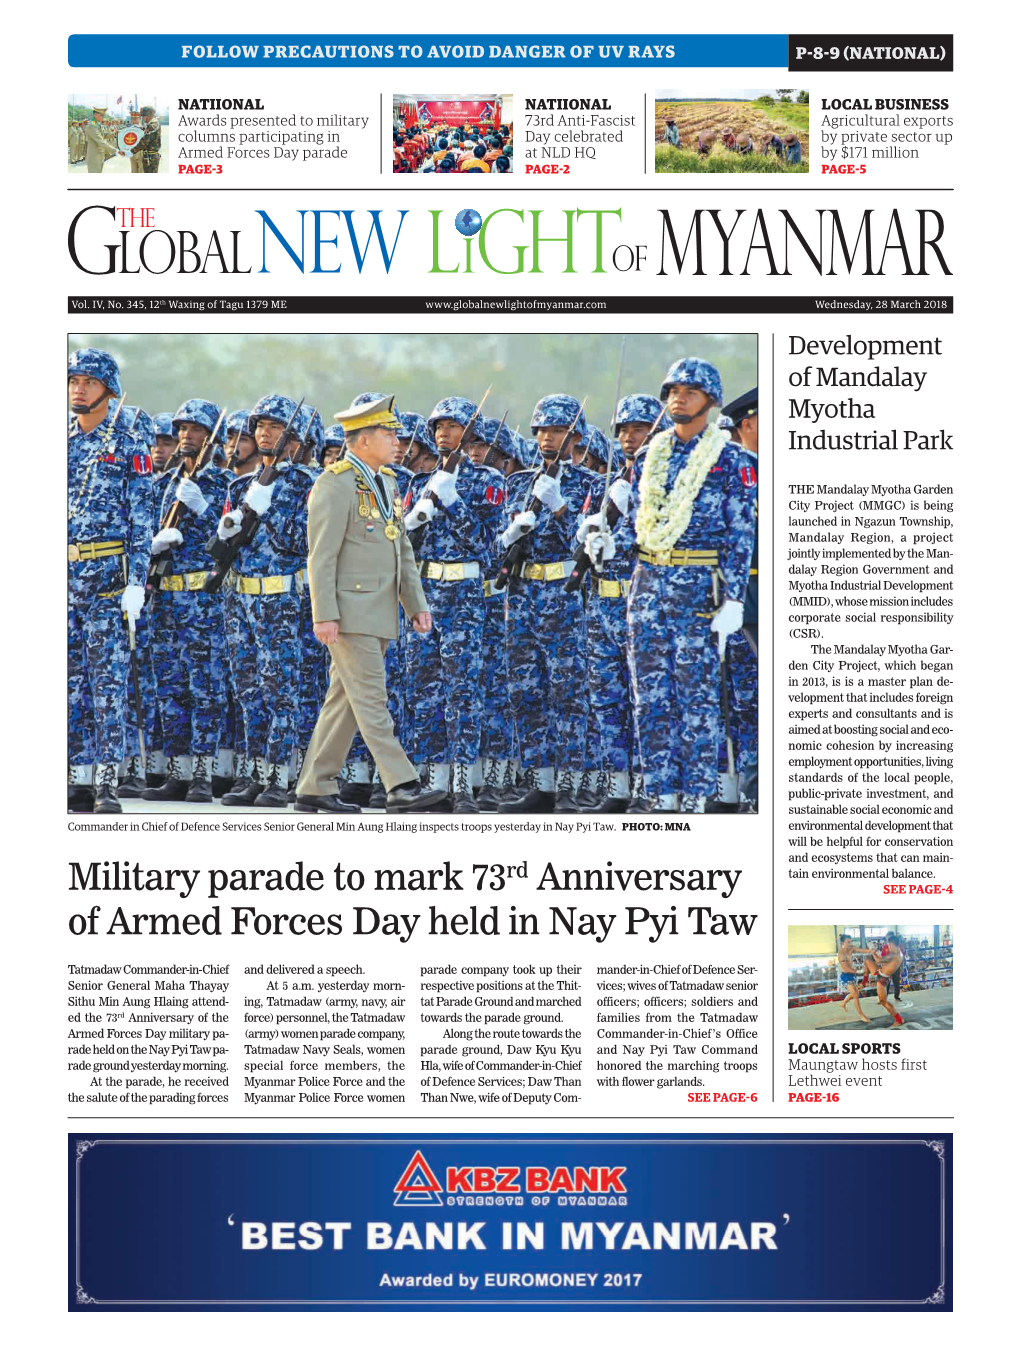 Military Parade to Mark 73Rd Anniversary of Armed Forces Day Held in Nay Pyi Taw